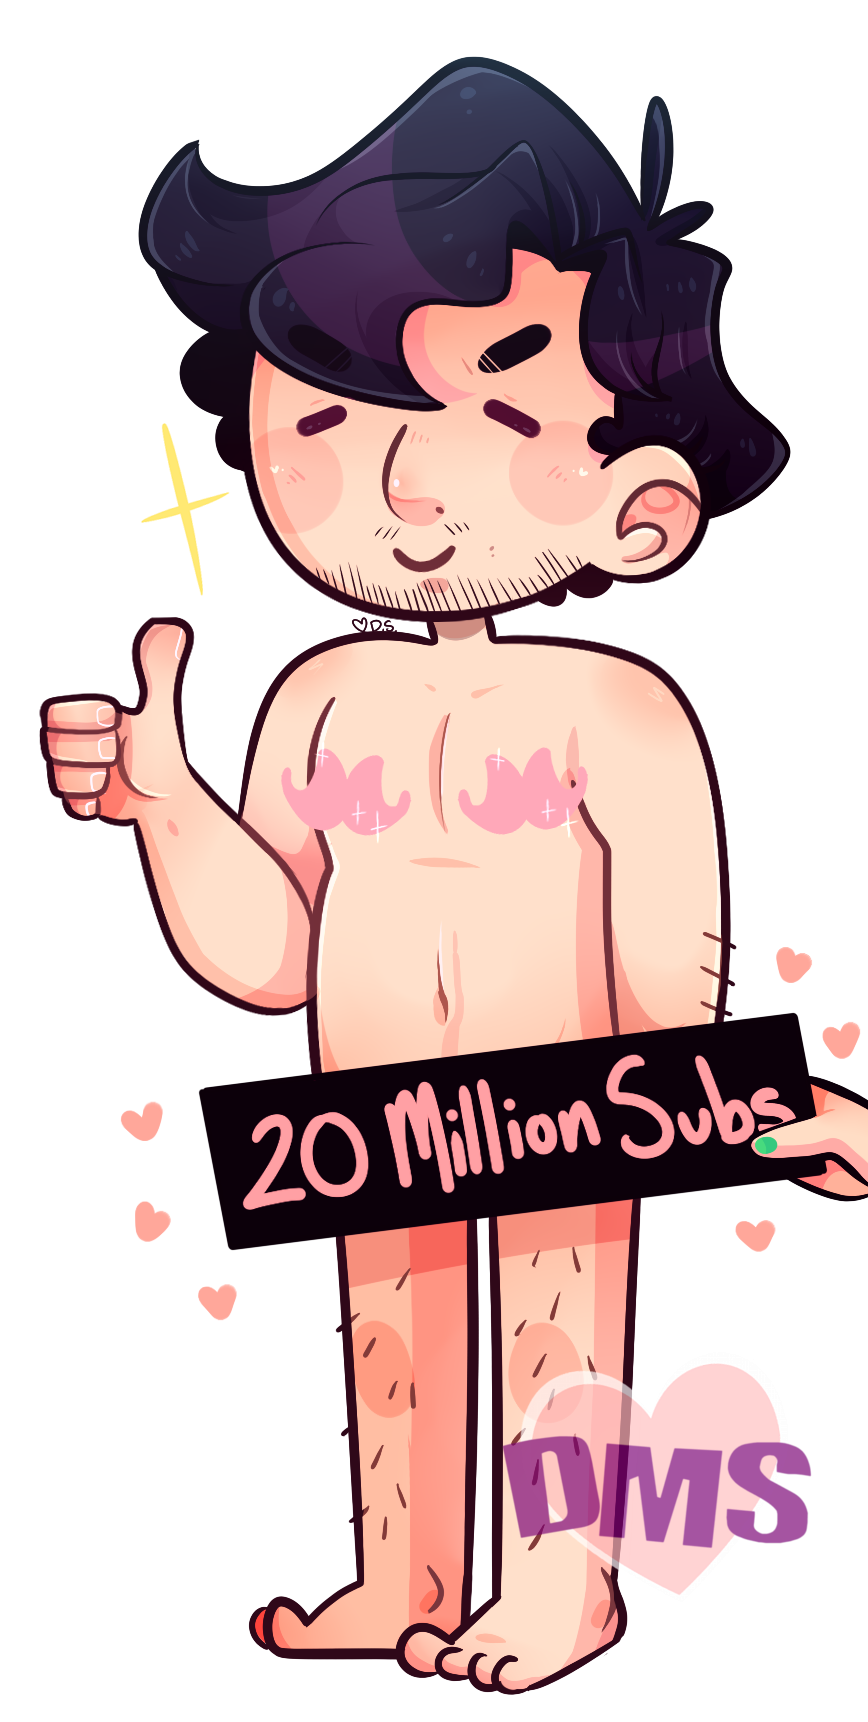 Subs a million nudes at 